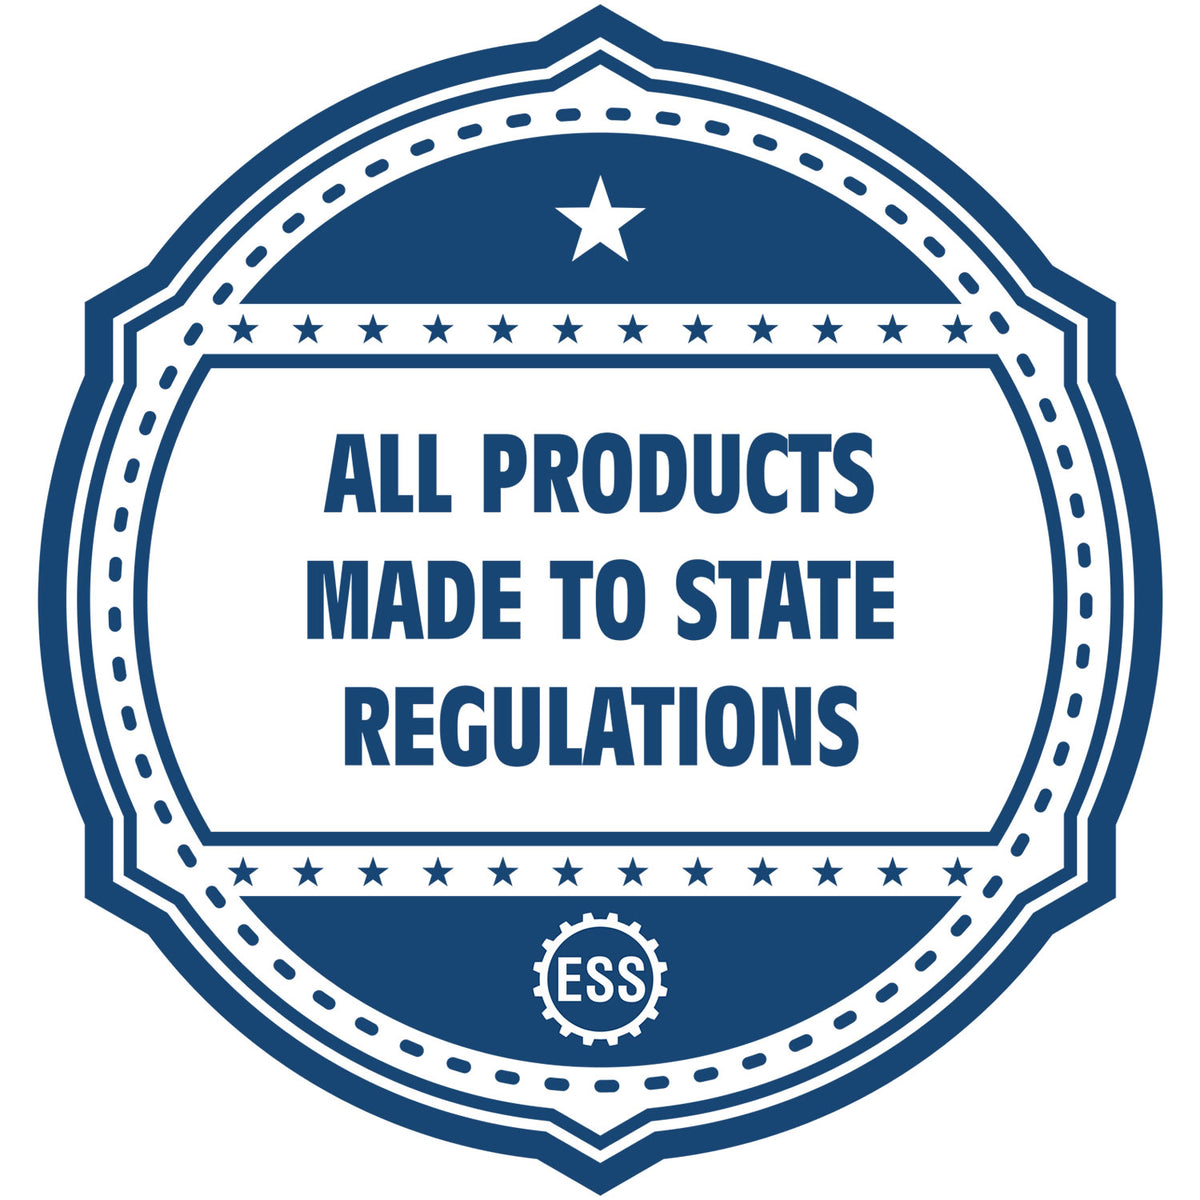 A blue icon or badge for the Soft Maine Professional Geologist Seal showing that this product is made in compliance with state regulations.